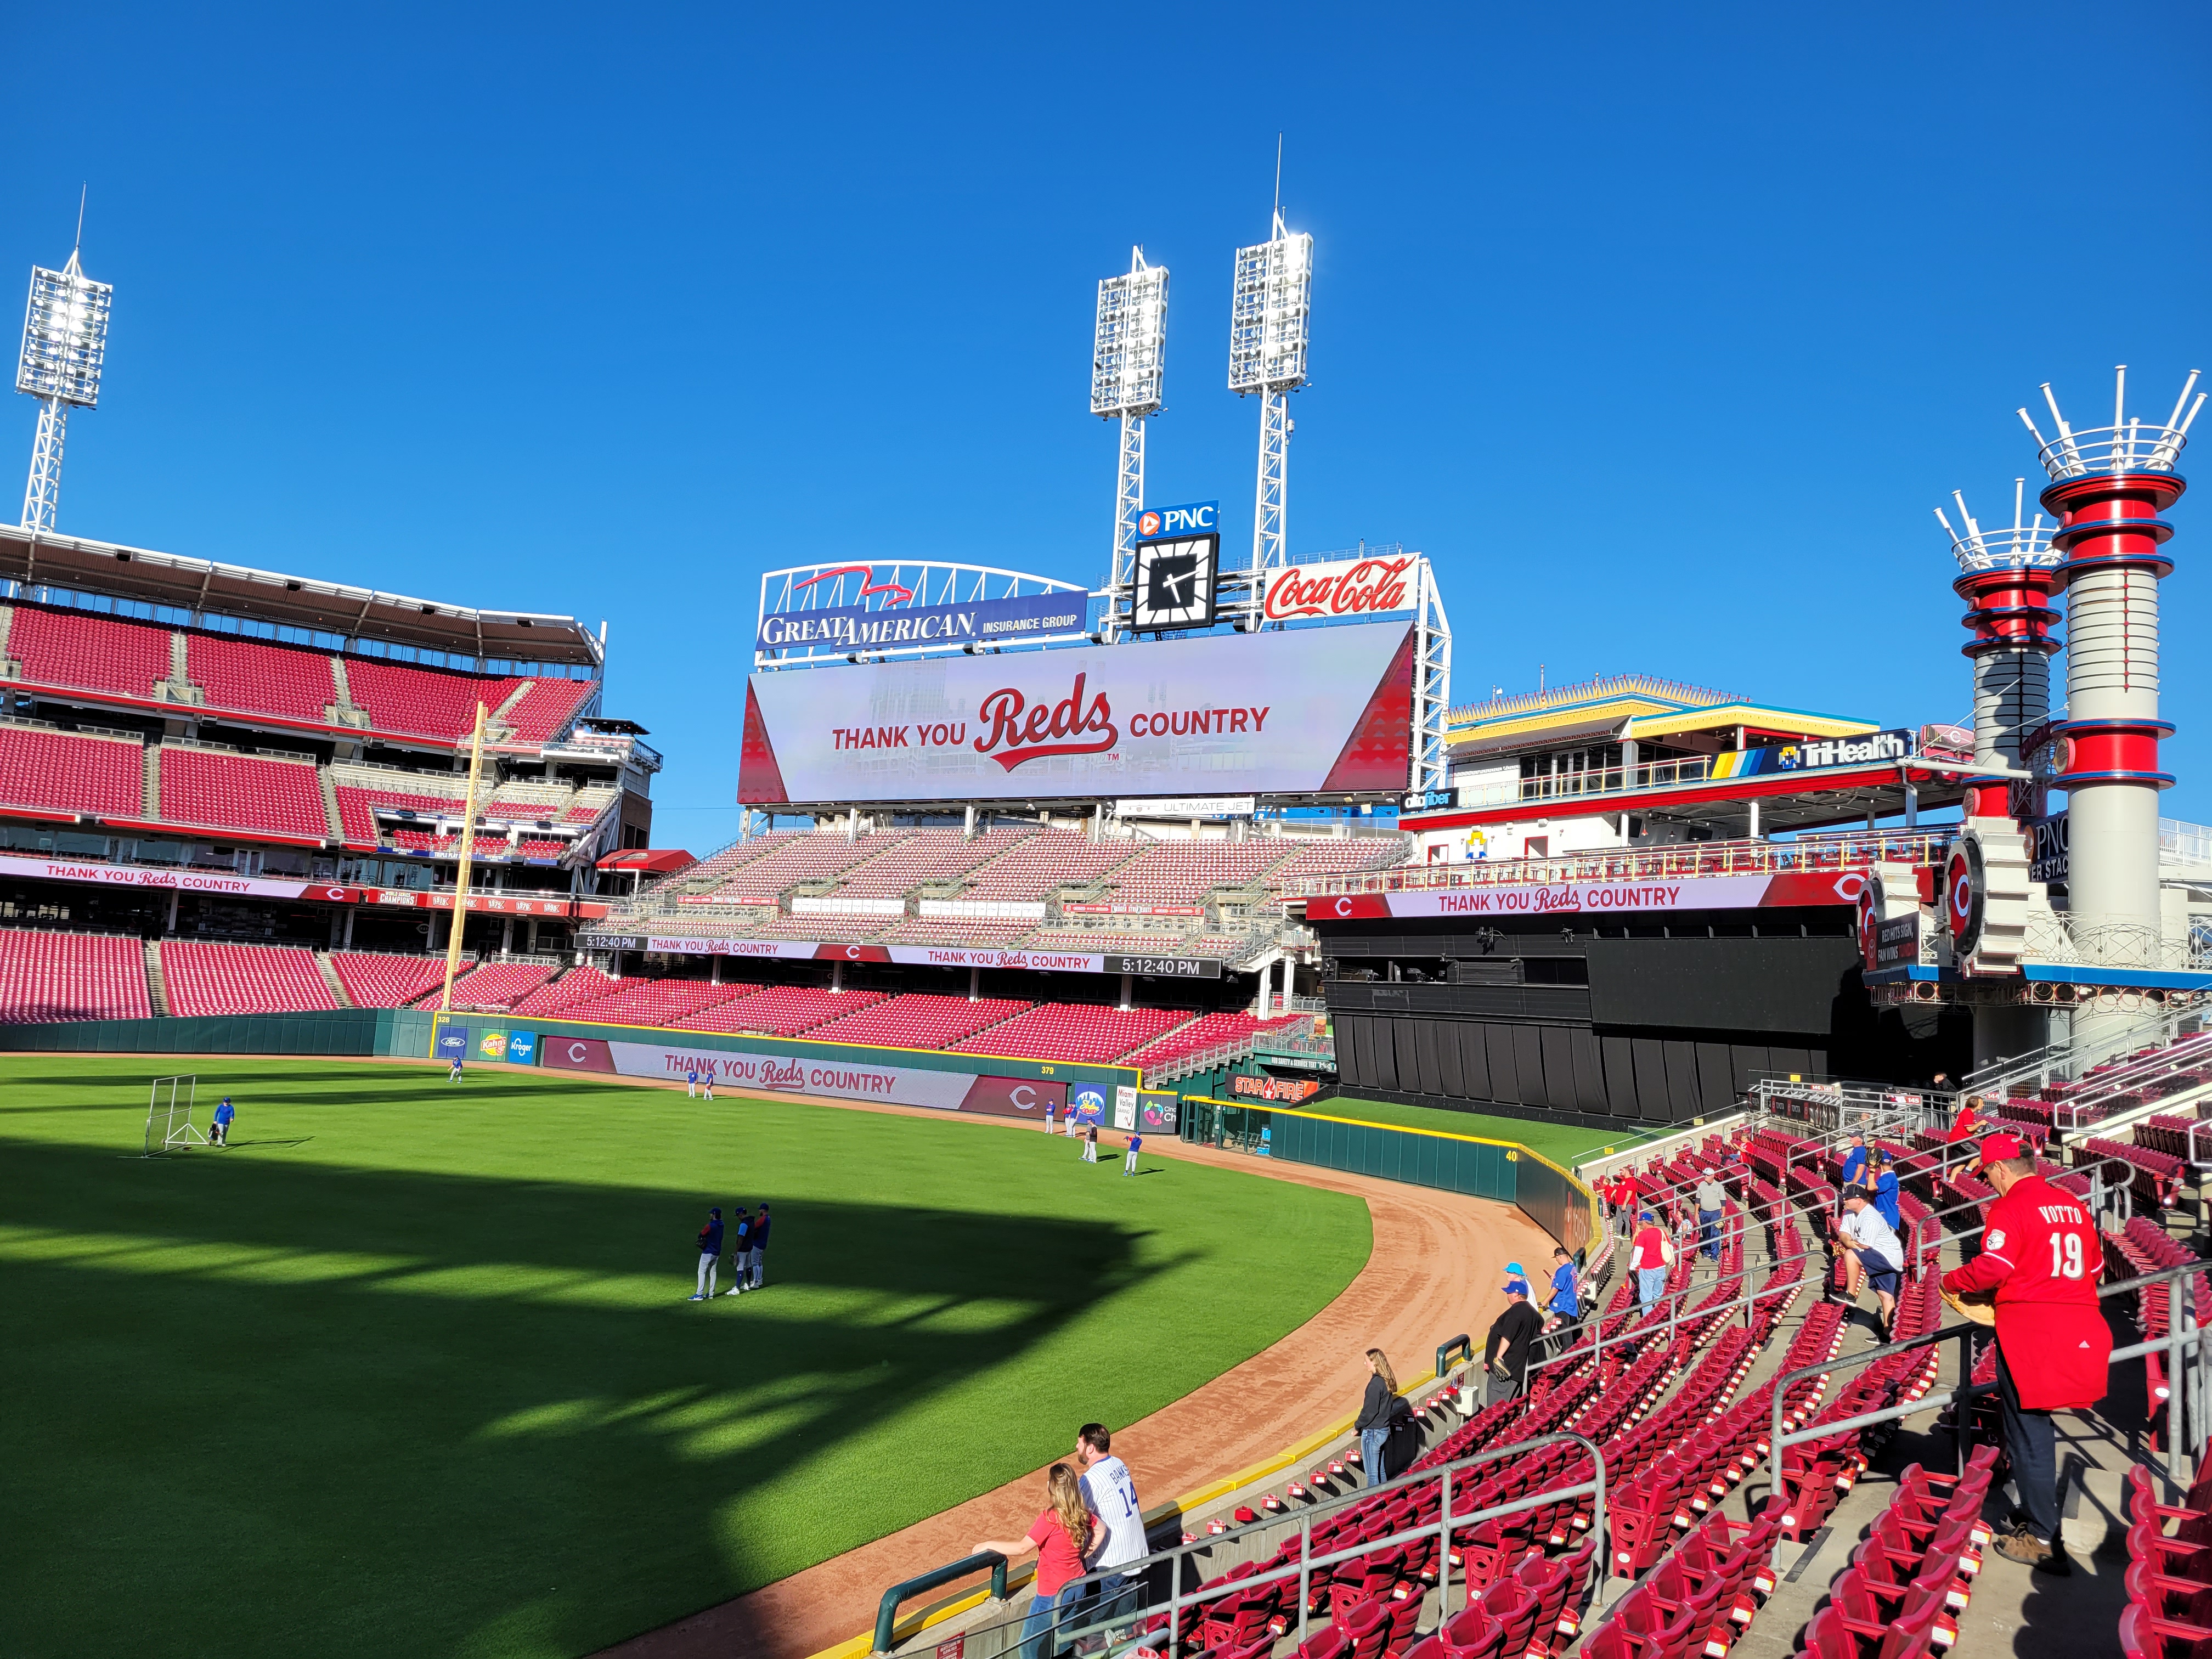 Great American Ball Park: Going to a Reds game? Here's what to know